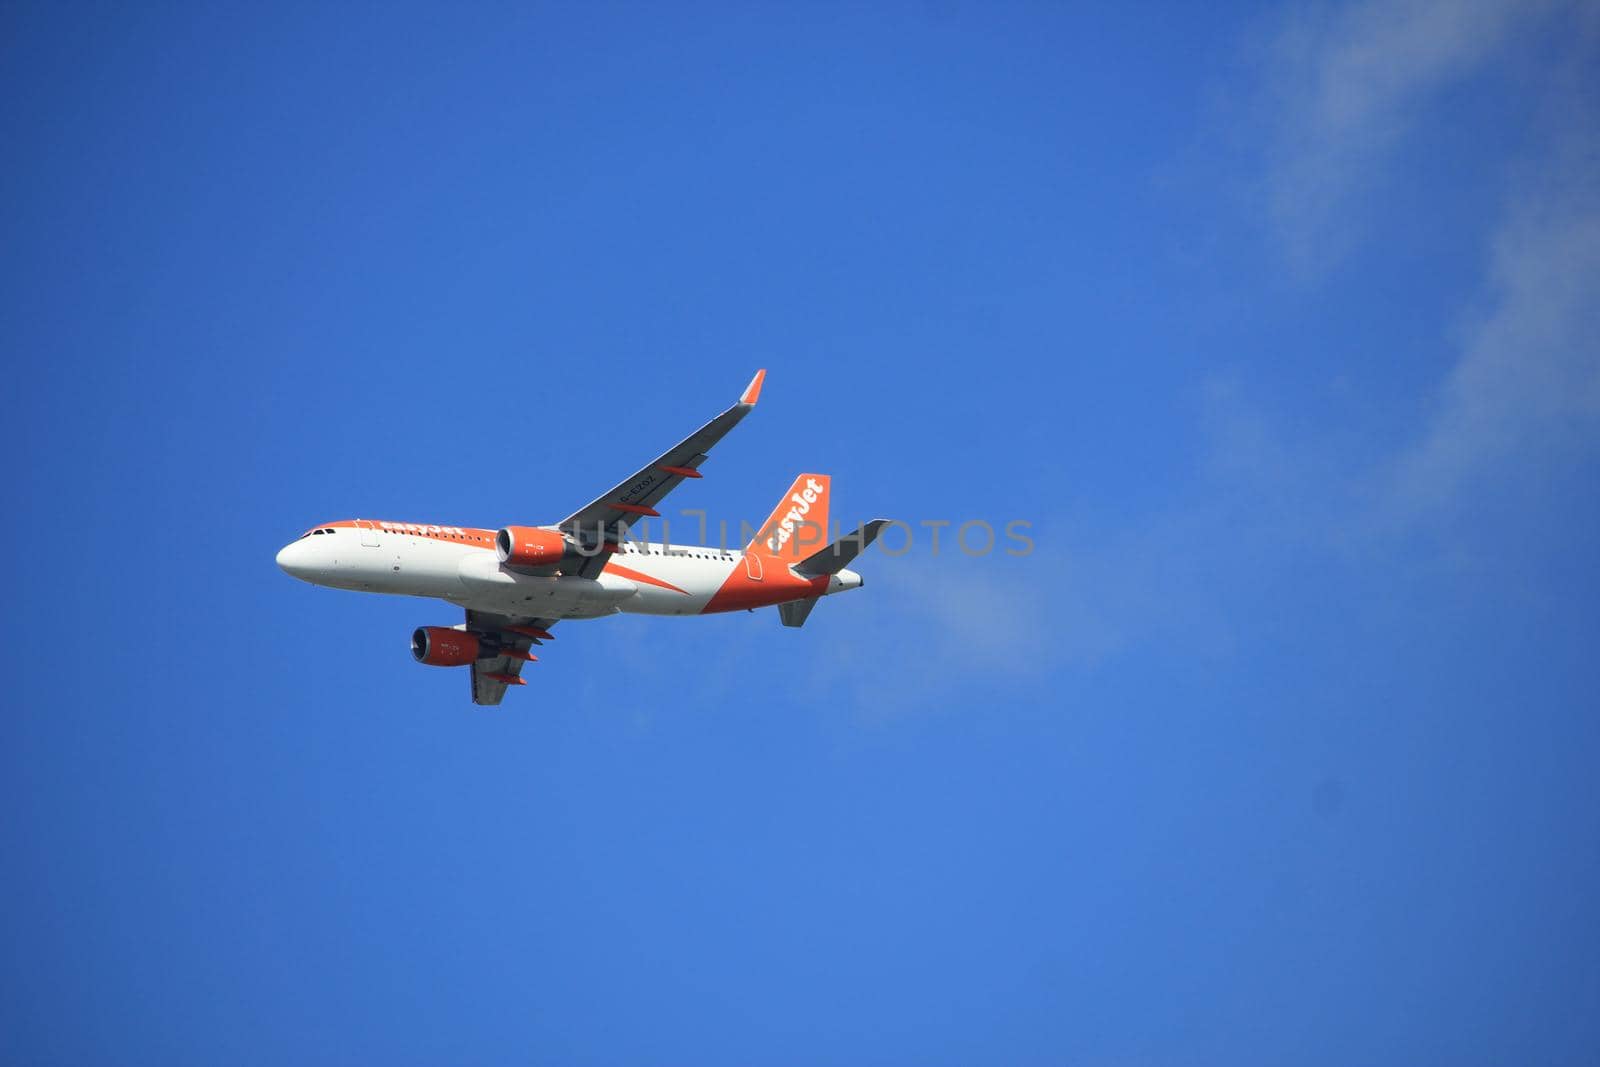 Amsterdam the Netherlands - September 23rd 2017: G-EZOZ easyJet Airbus A320 takeoff from Kaagbaan runway, Amsterdam Airport Schiphol